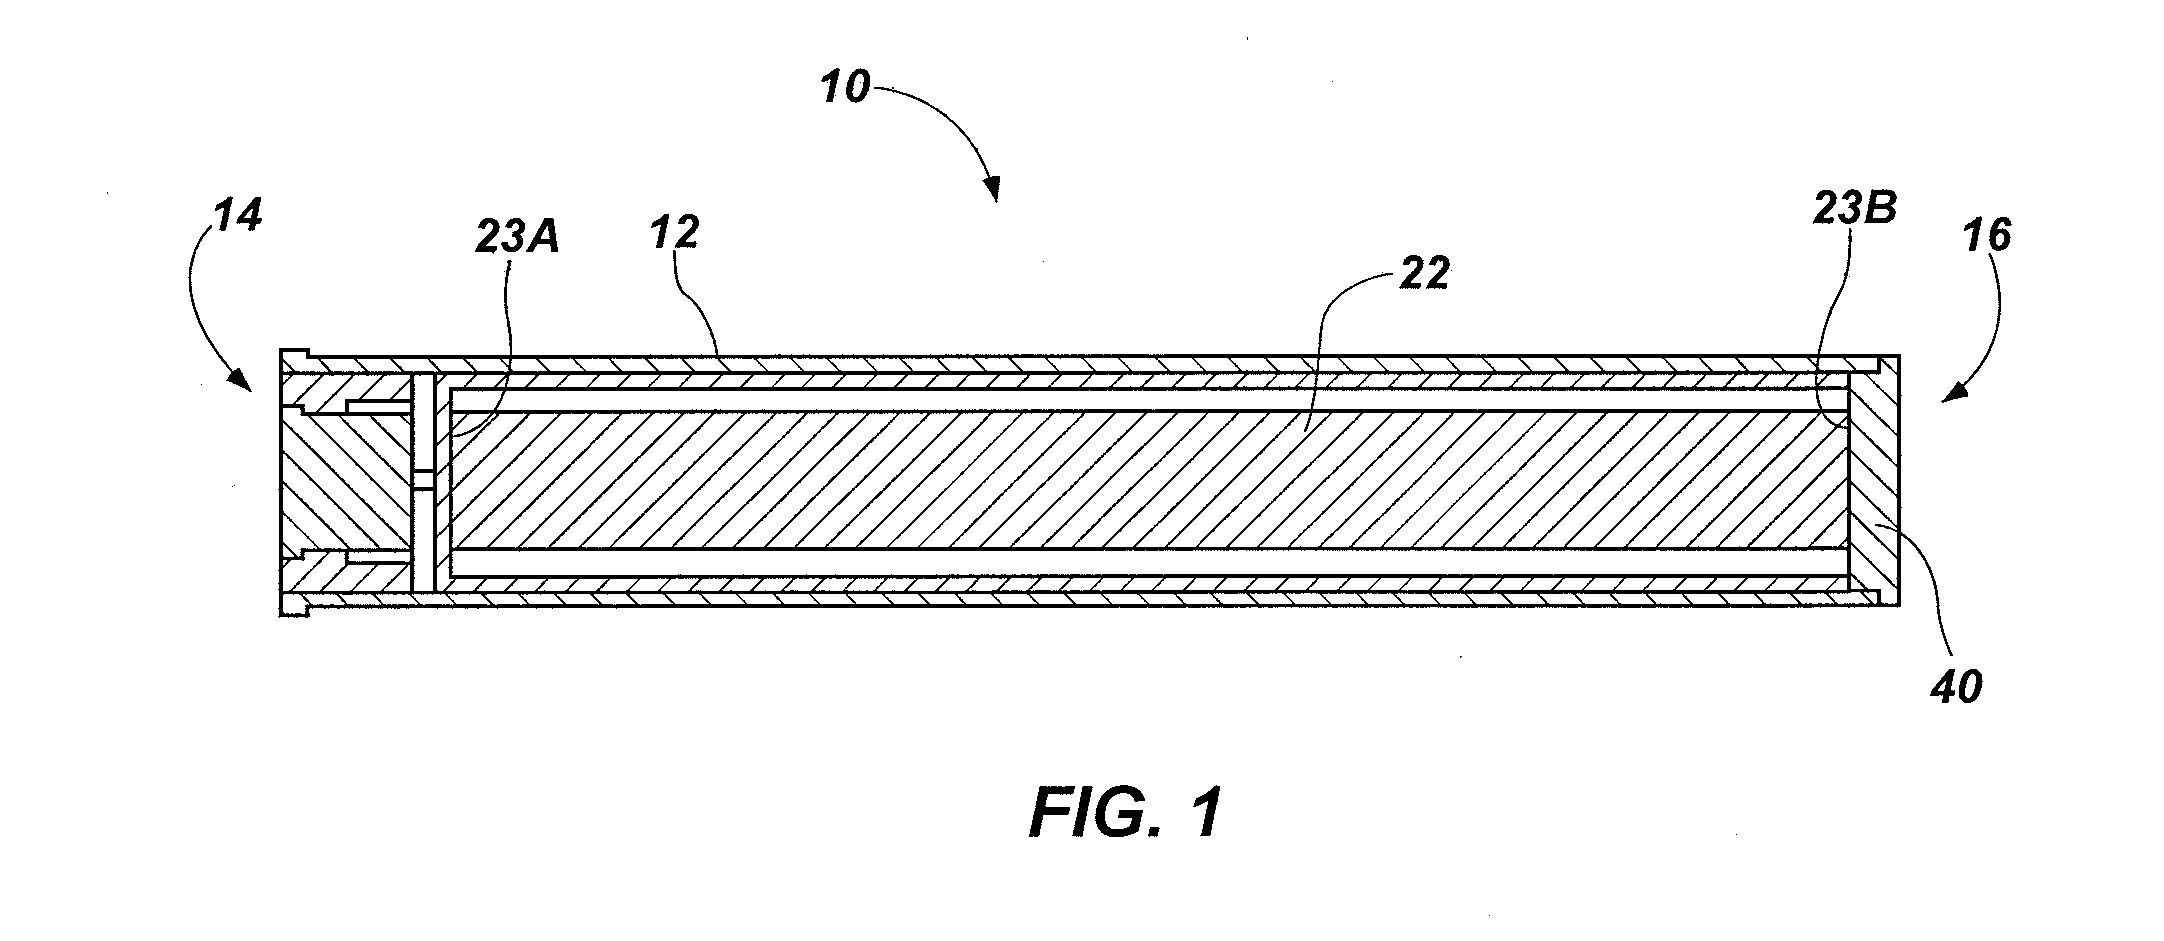 Compositions usable as flare compositions, countermeasure devices containing the flare compositions, and related methods